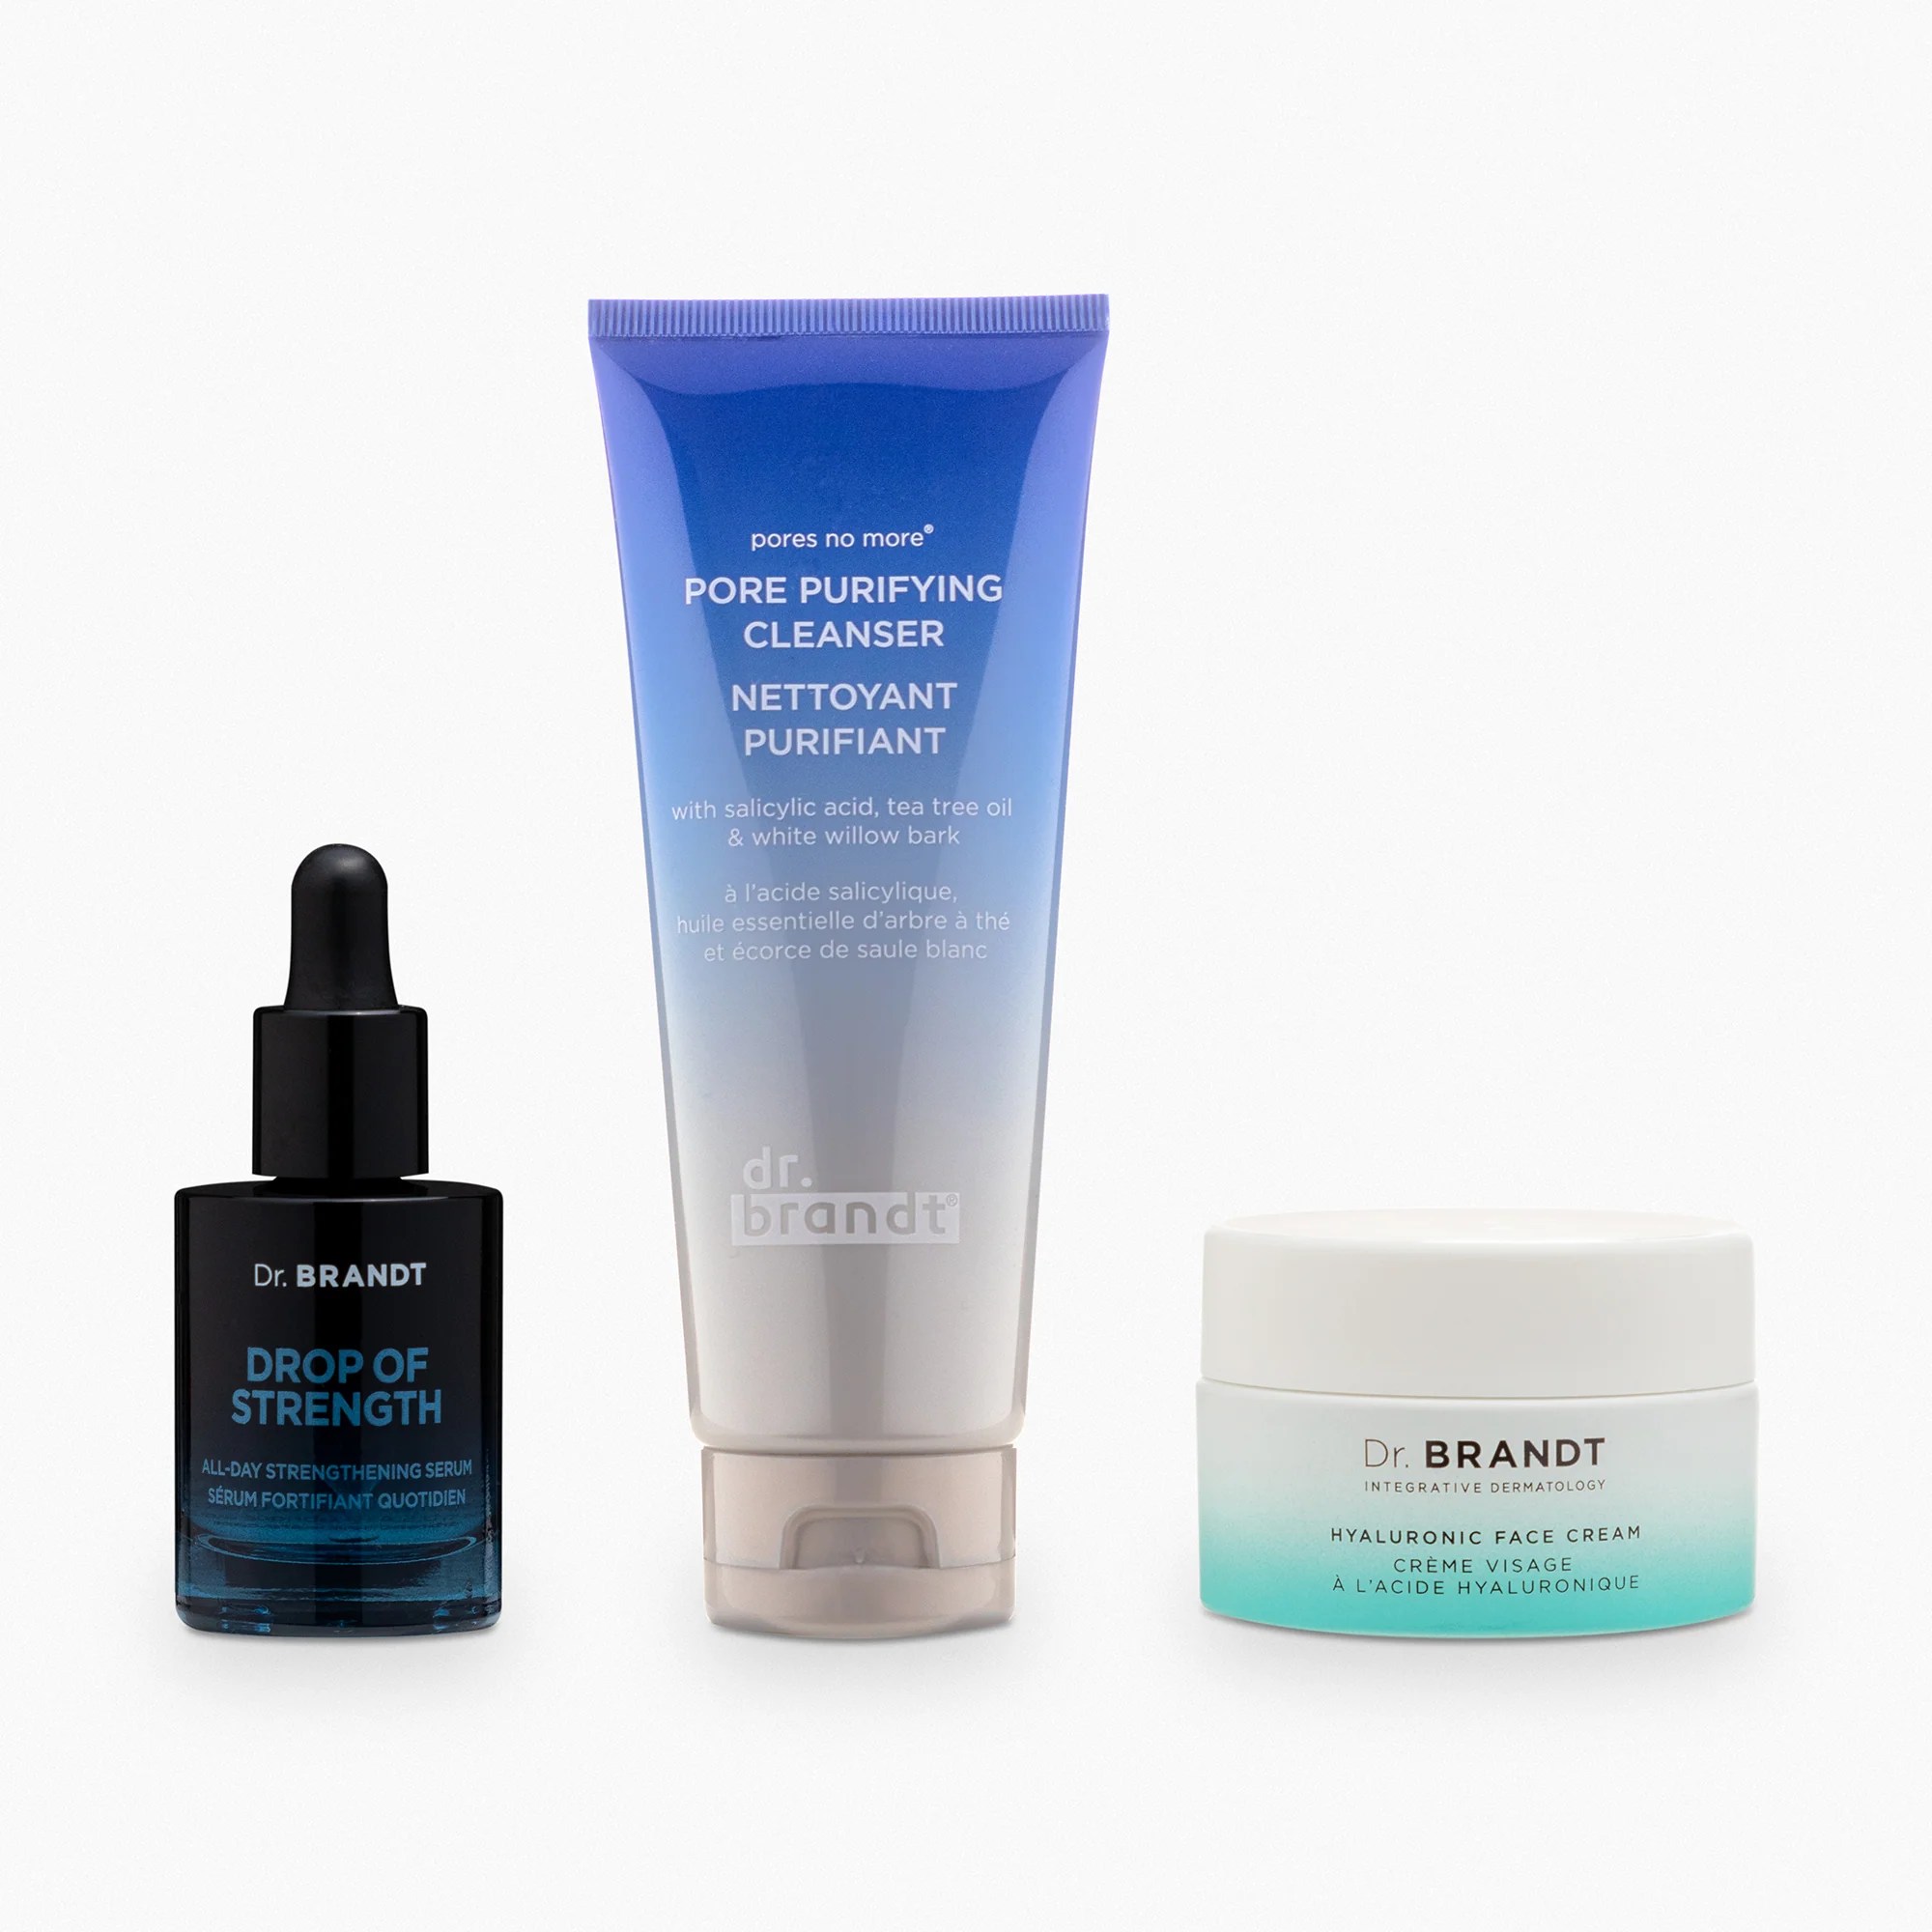 three dr. brandt products, on sale for black friday